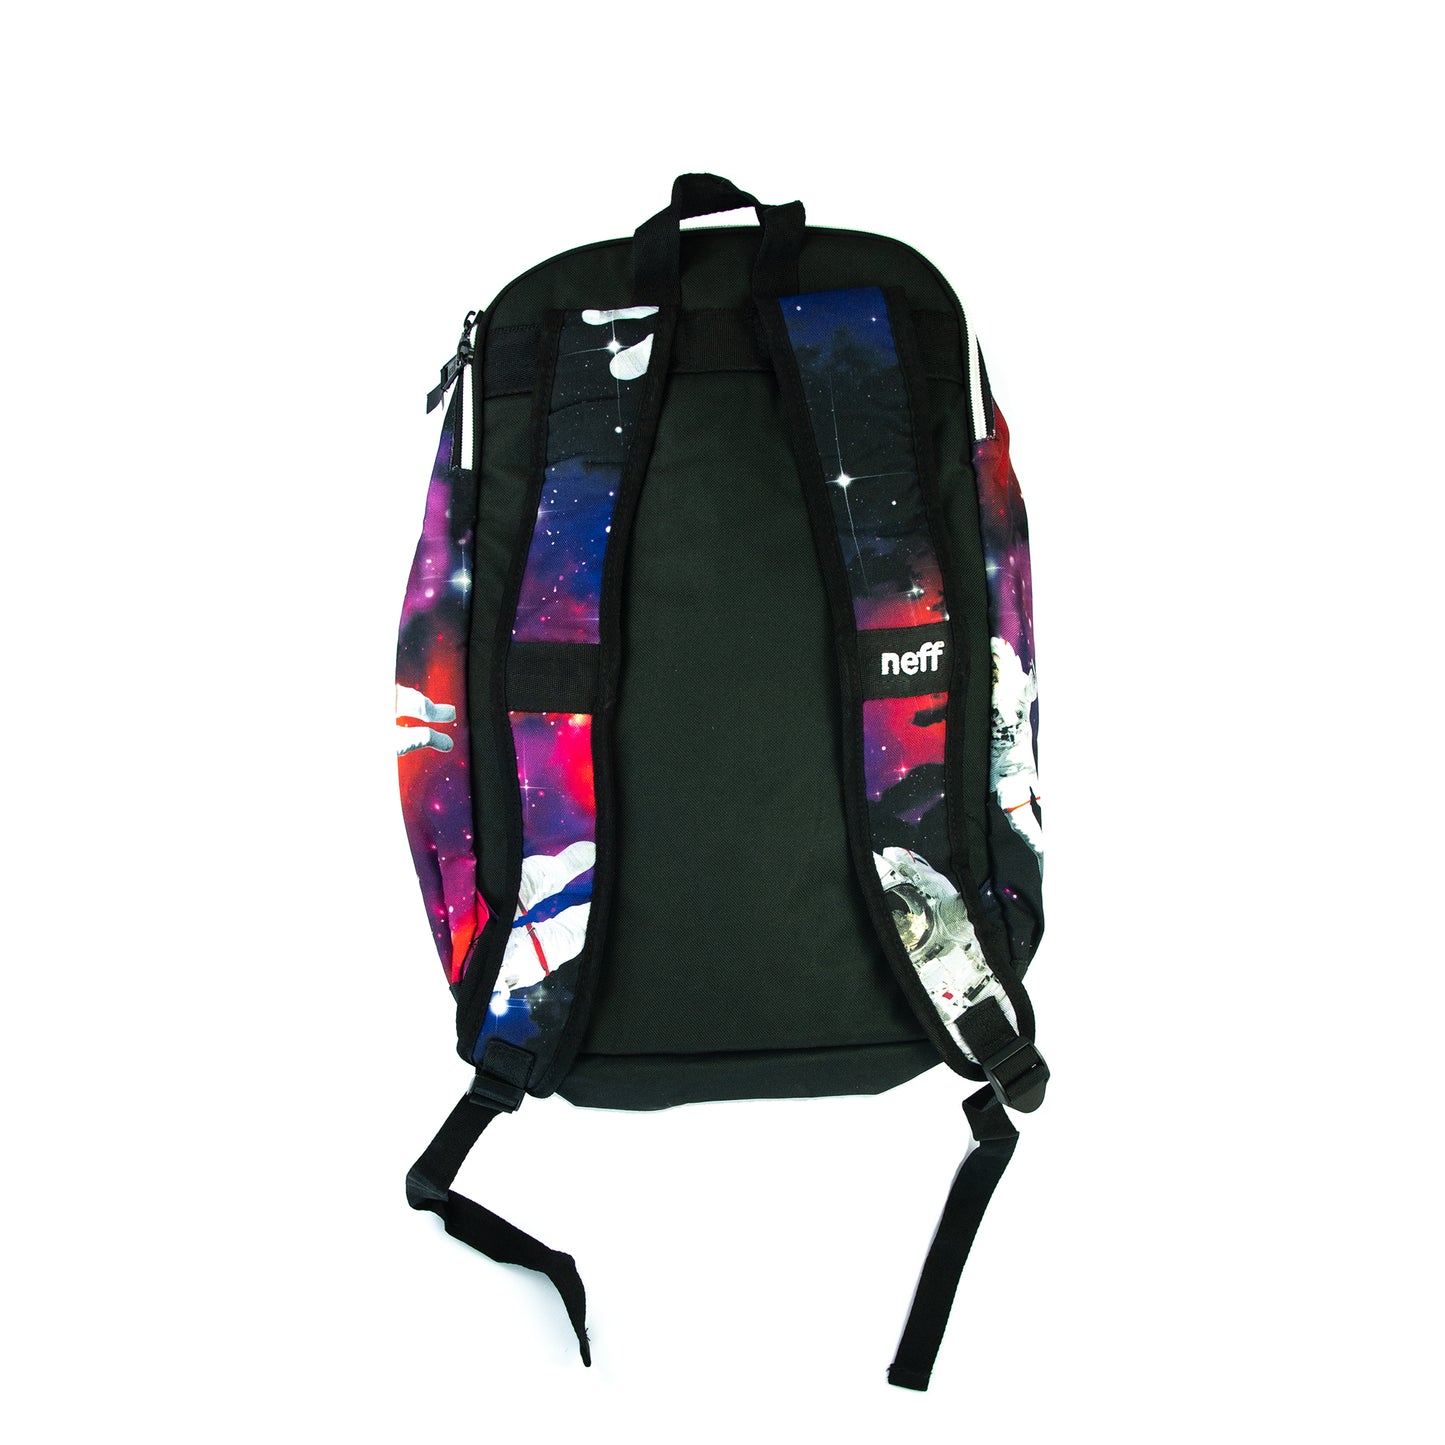 Zolo Pack Space Backpack